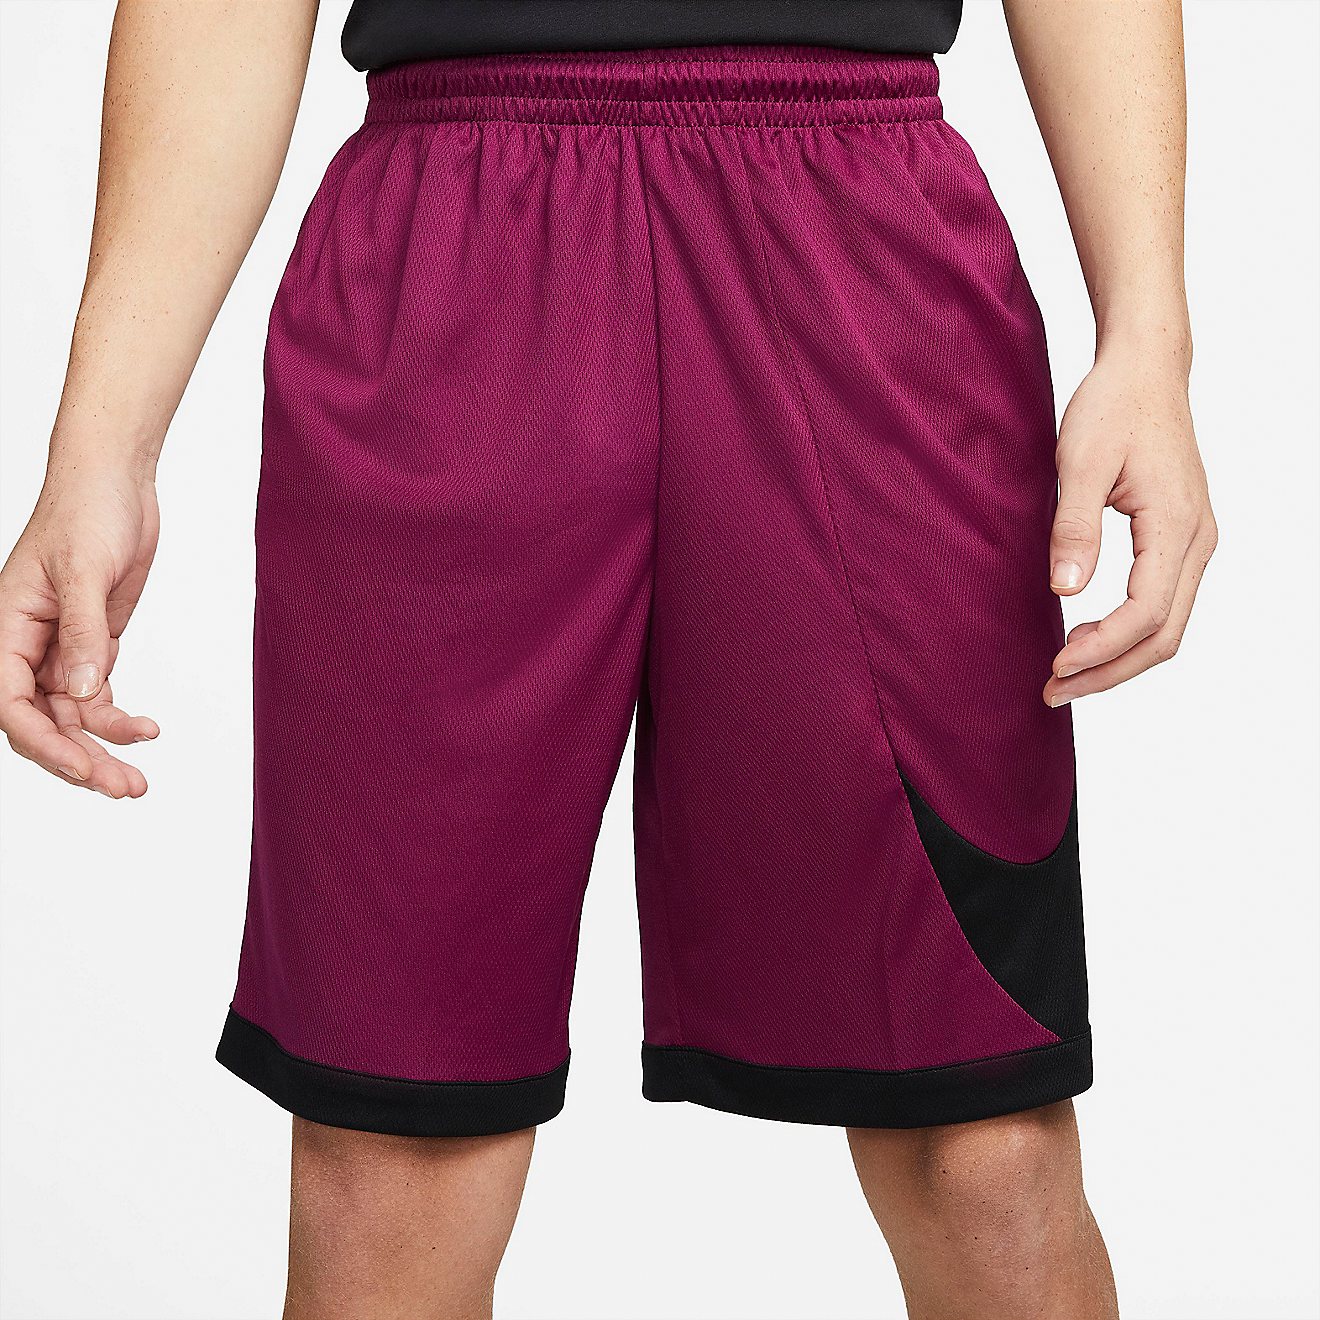 Nike Men's Dri-FIT HBR 3.0 Basketball Shorts                                                                                     - view number 2